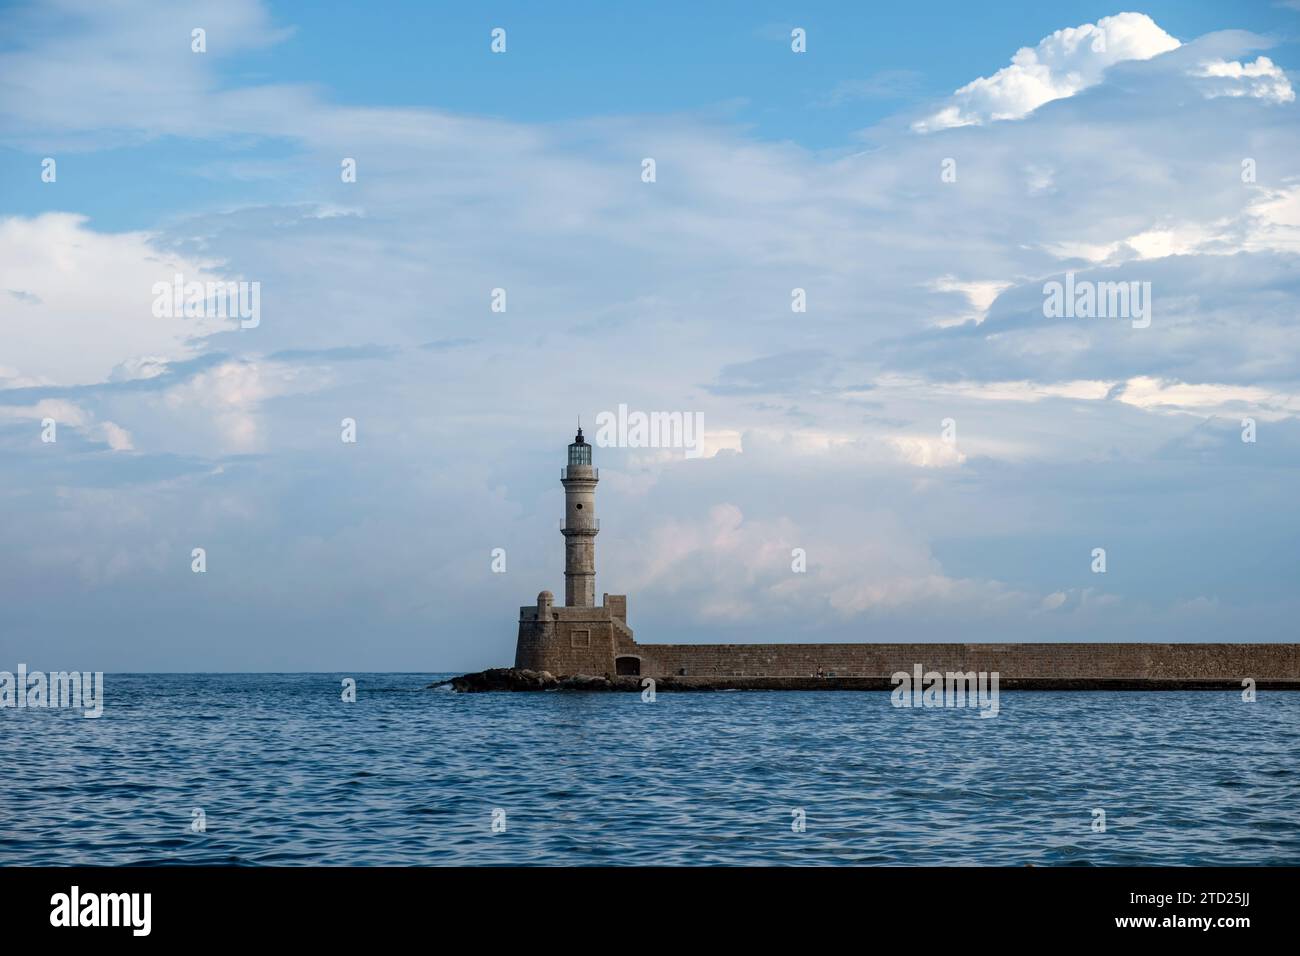 Crete island, Greece. Lighthouse, beacon at Venetian harbour in Old Town of Chania, cloudy sky Stock Photo